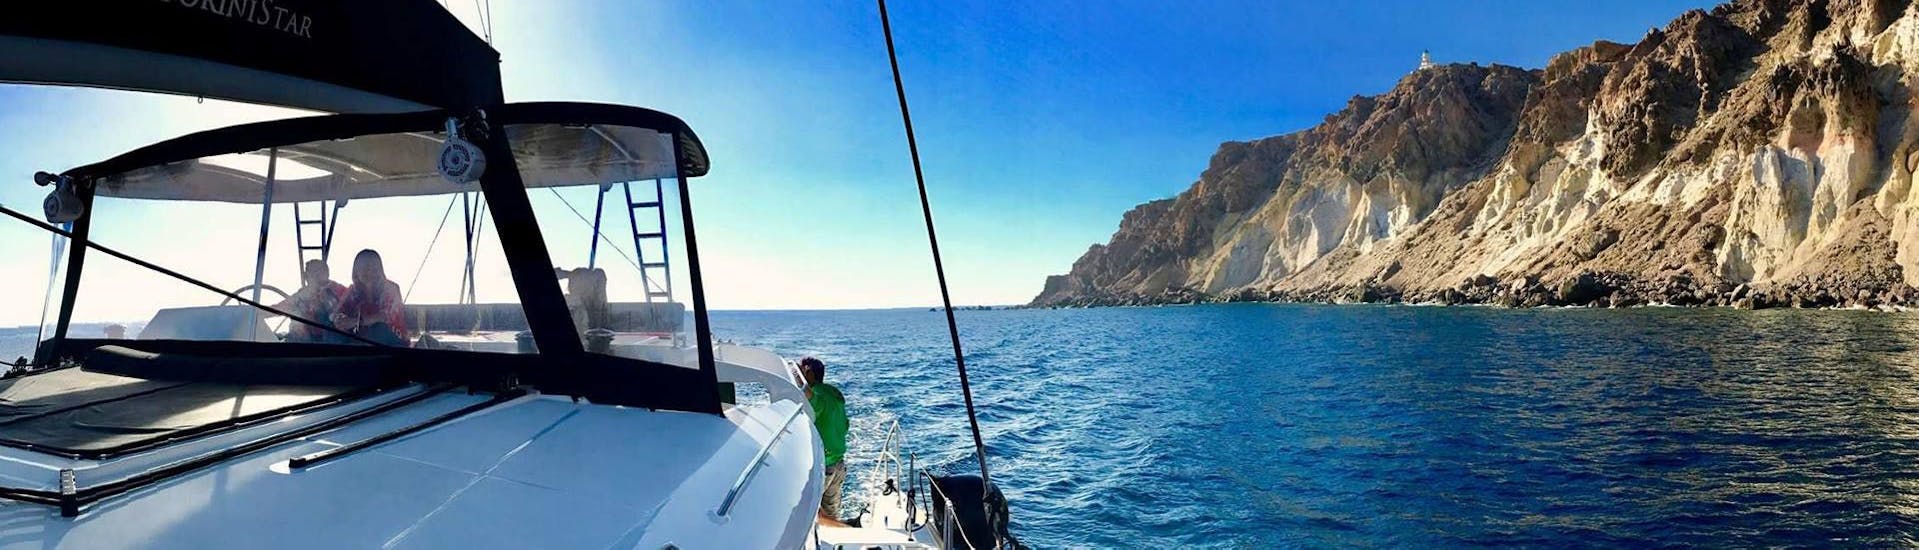 Panoramic views of the coast of Santoni during a boat trip with Santorini Star Sailing Luxury.